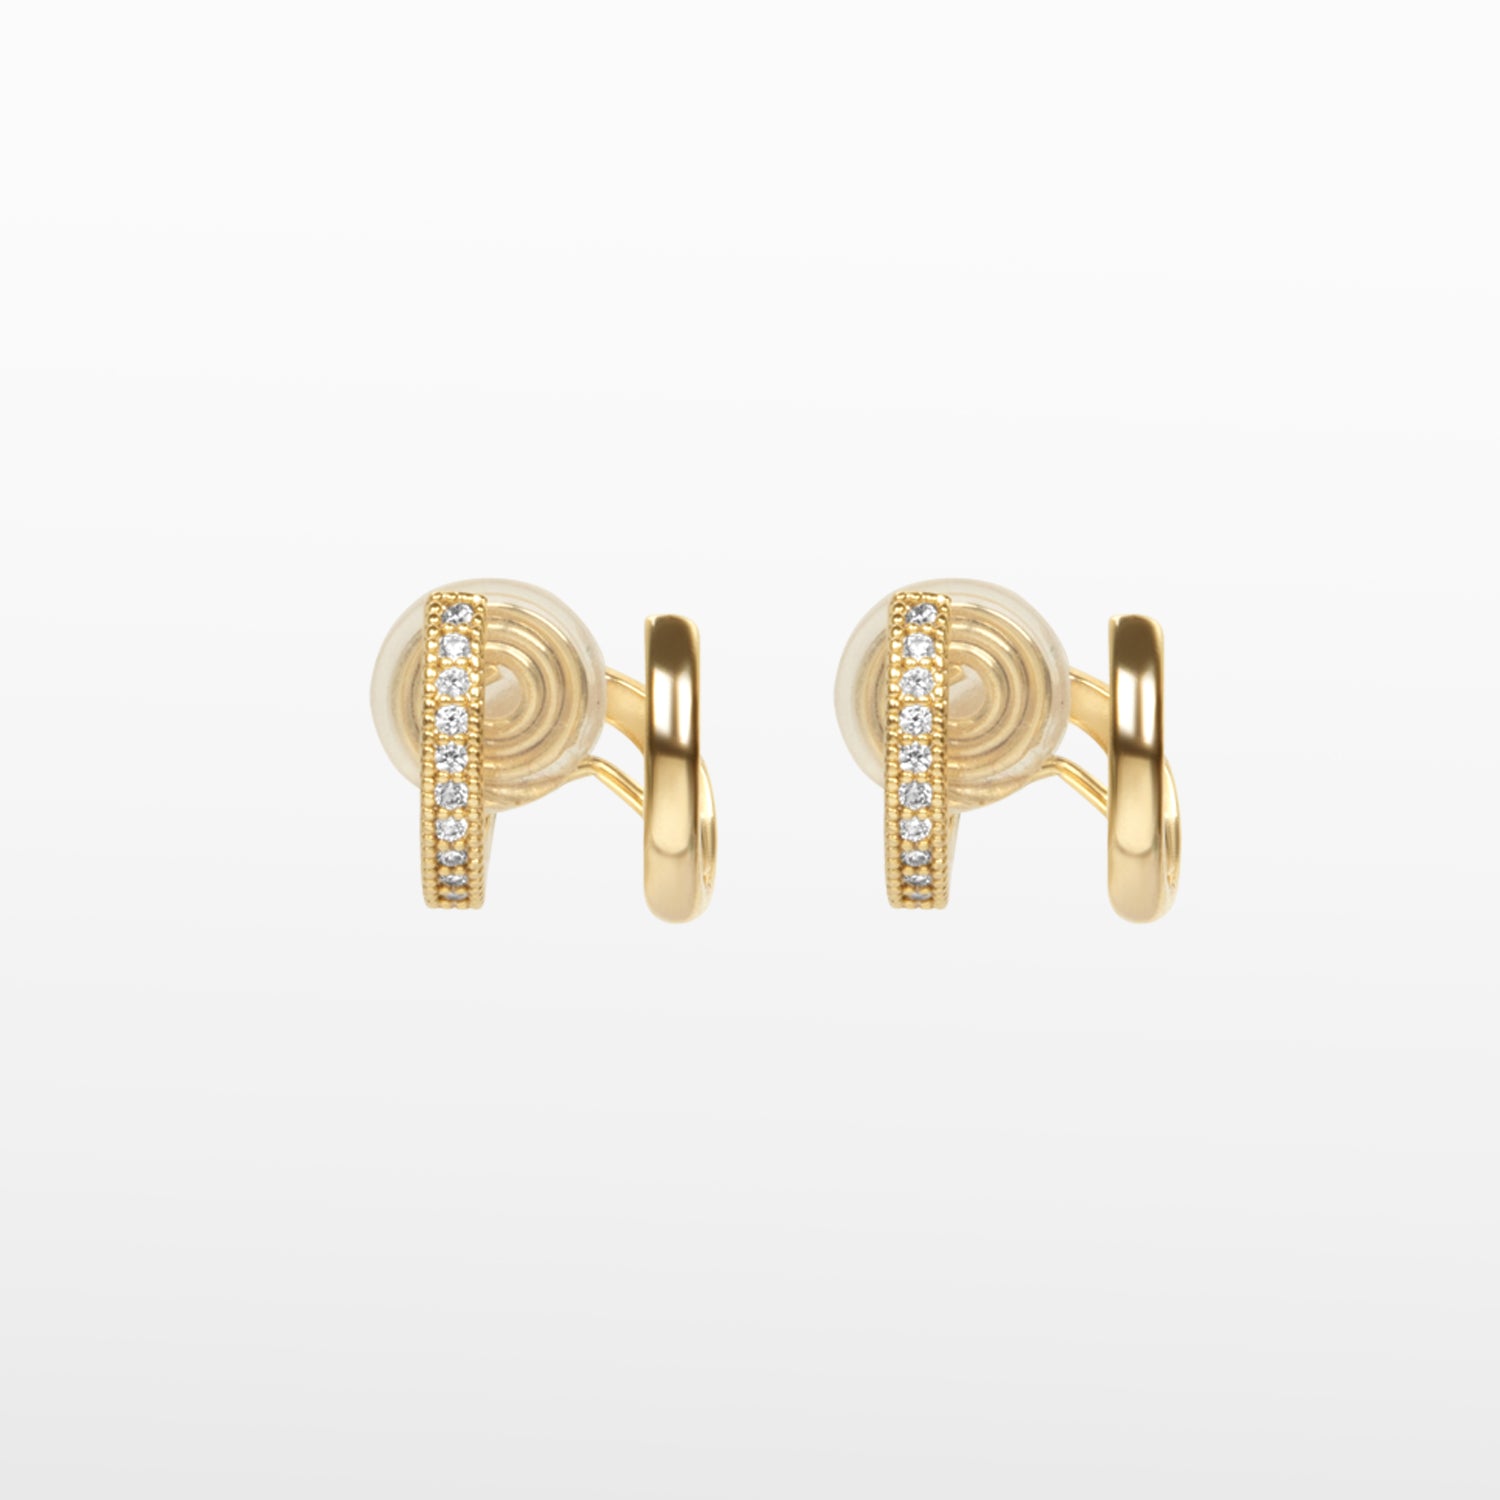 Image of the Double Hoop Pave Clip-On Earrings in Gold are ideal for all ear types, offering medium secure hold and adjustable padding. Crafted in gold plated copper and embellished with Cubic Zirconia, expect a comfortable wear of up to 24 hours. Please note, product is sold as one single pair.